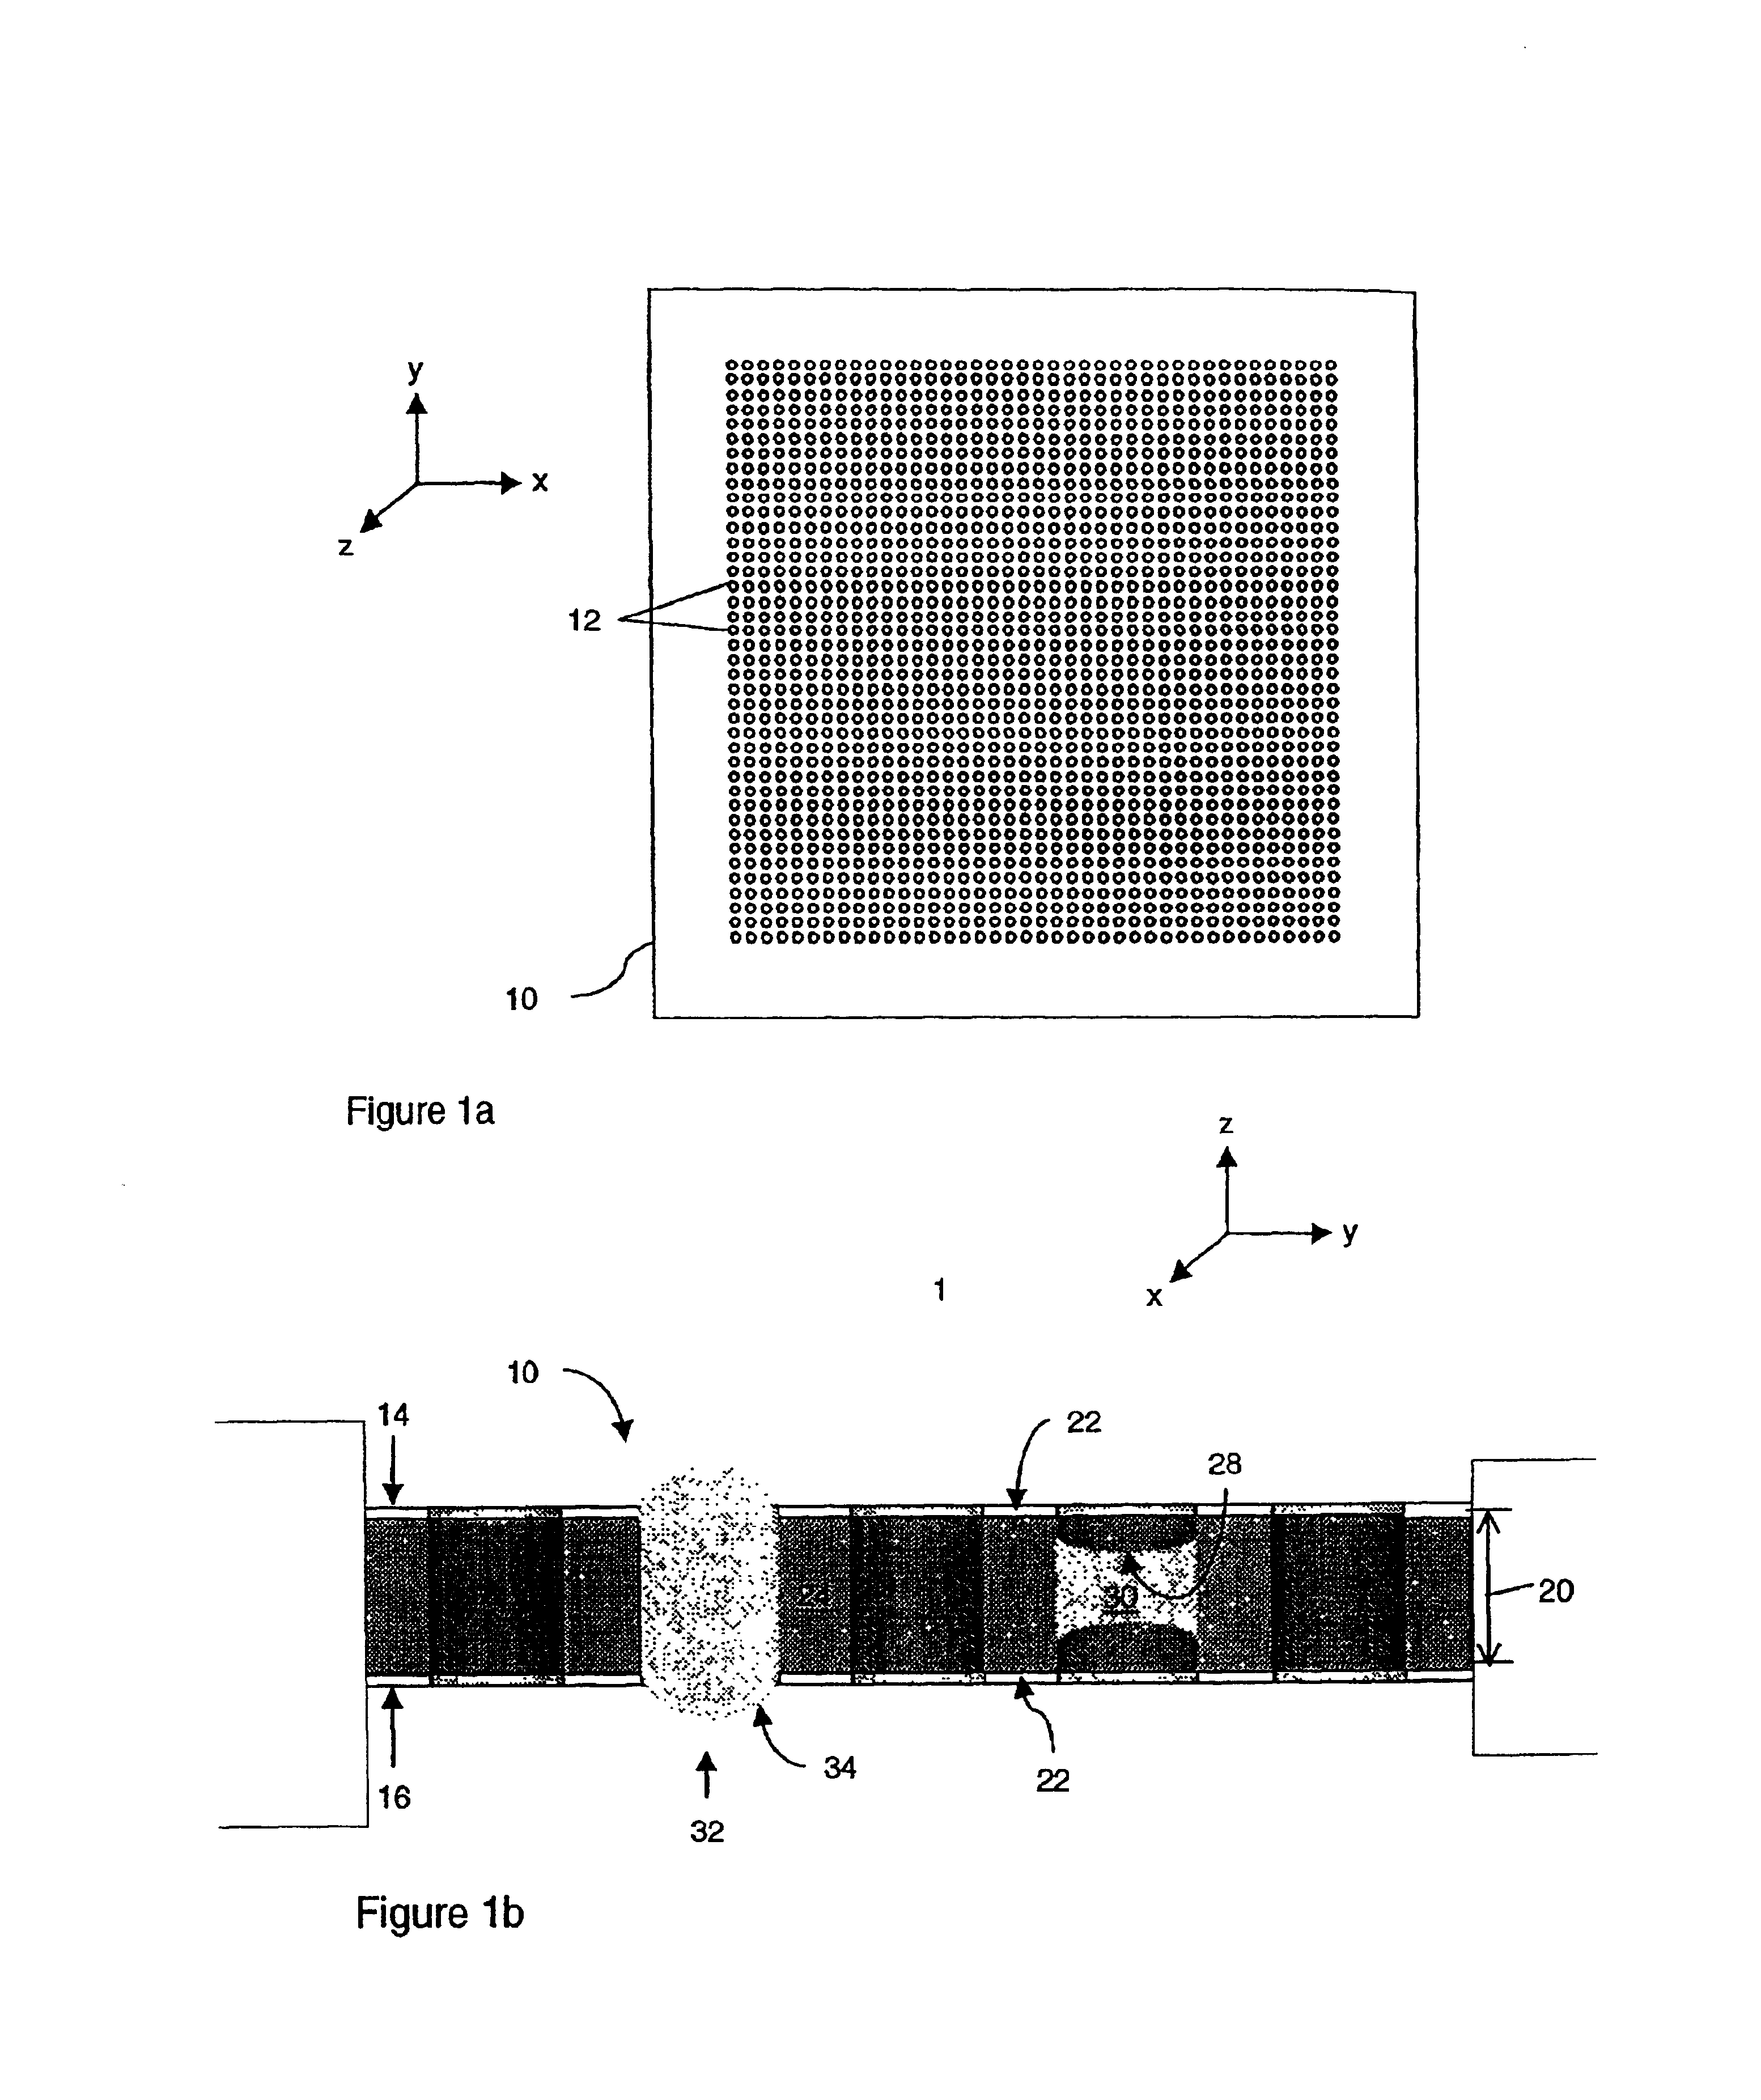 Methods for screening substances in a microwell array